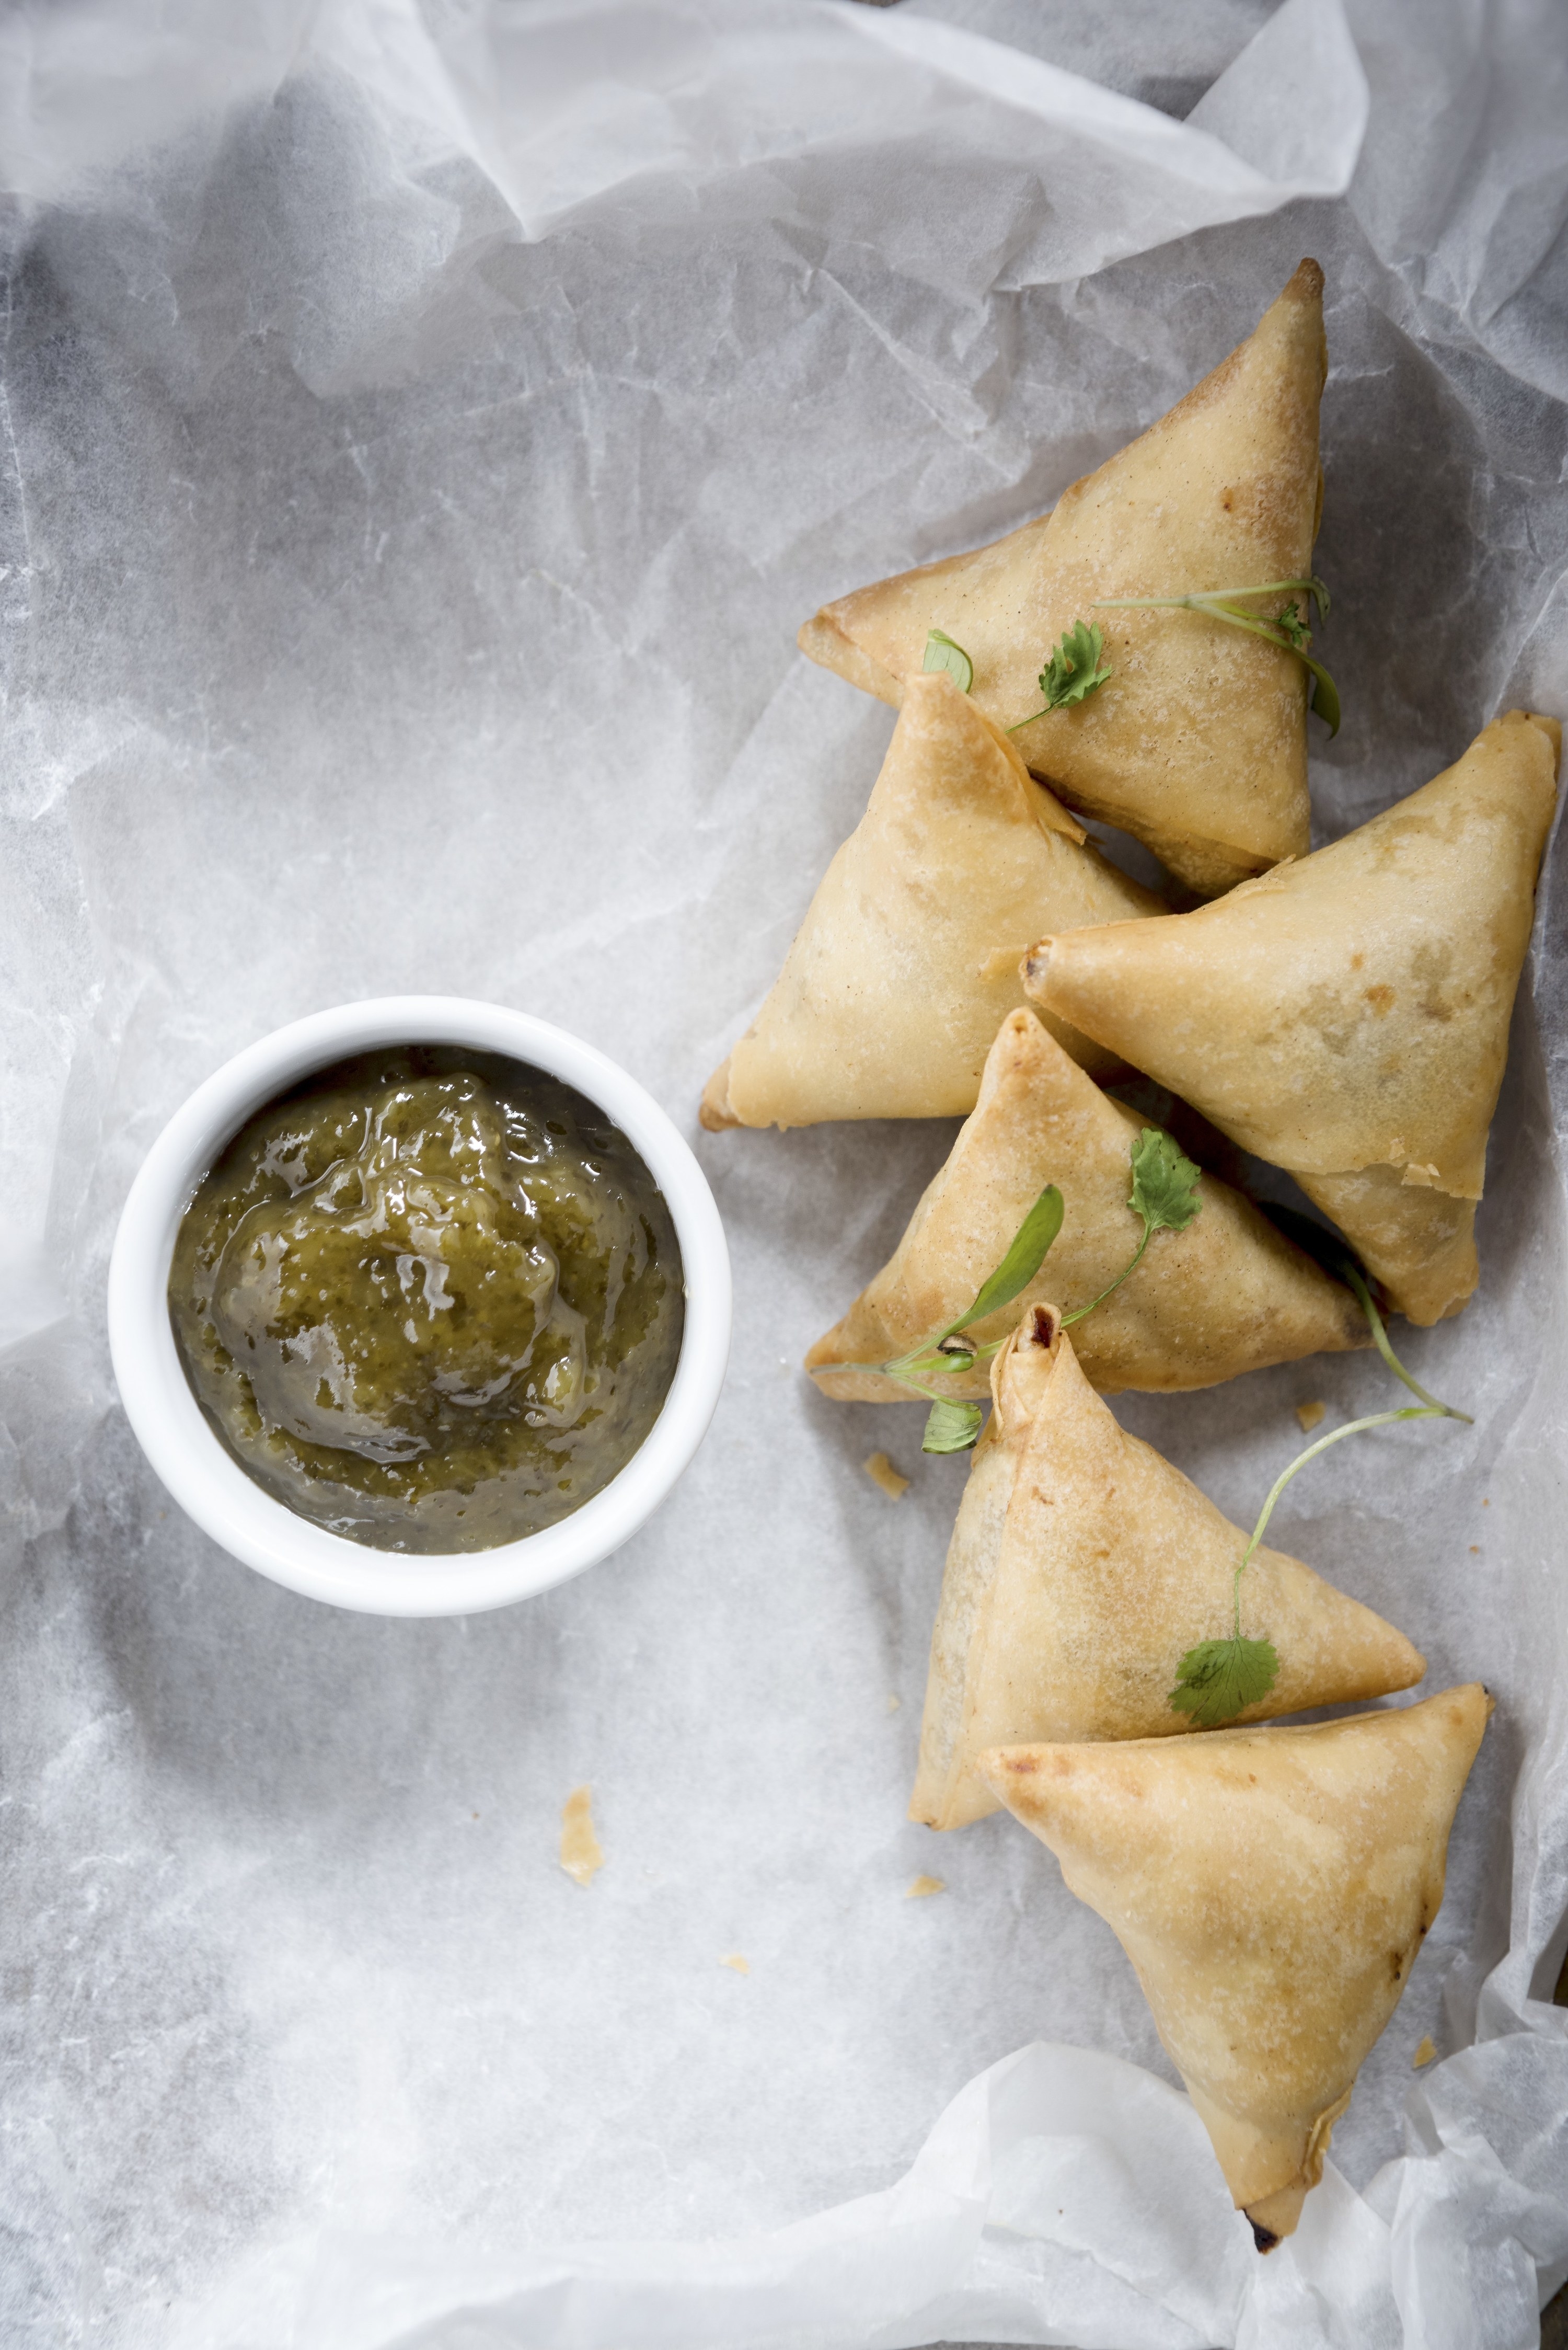 Six samosas with mint and mango chutney are on top of white paper